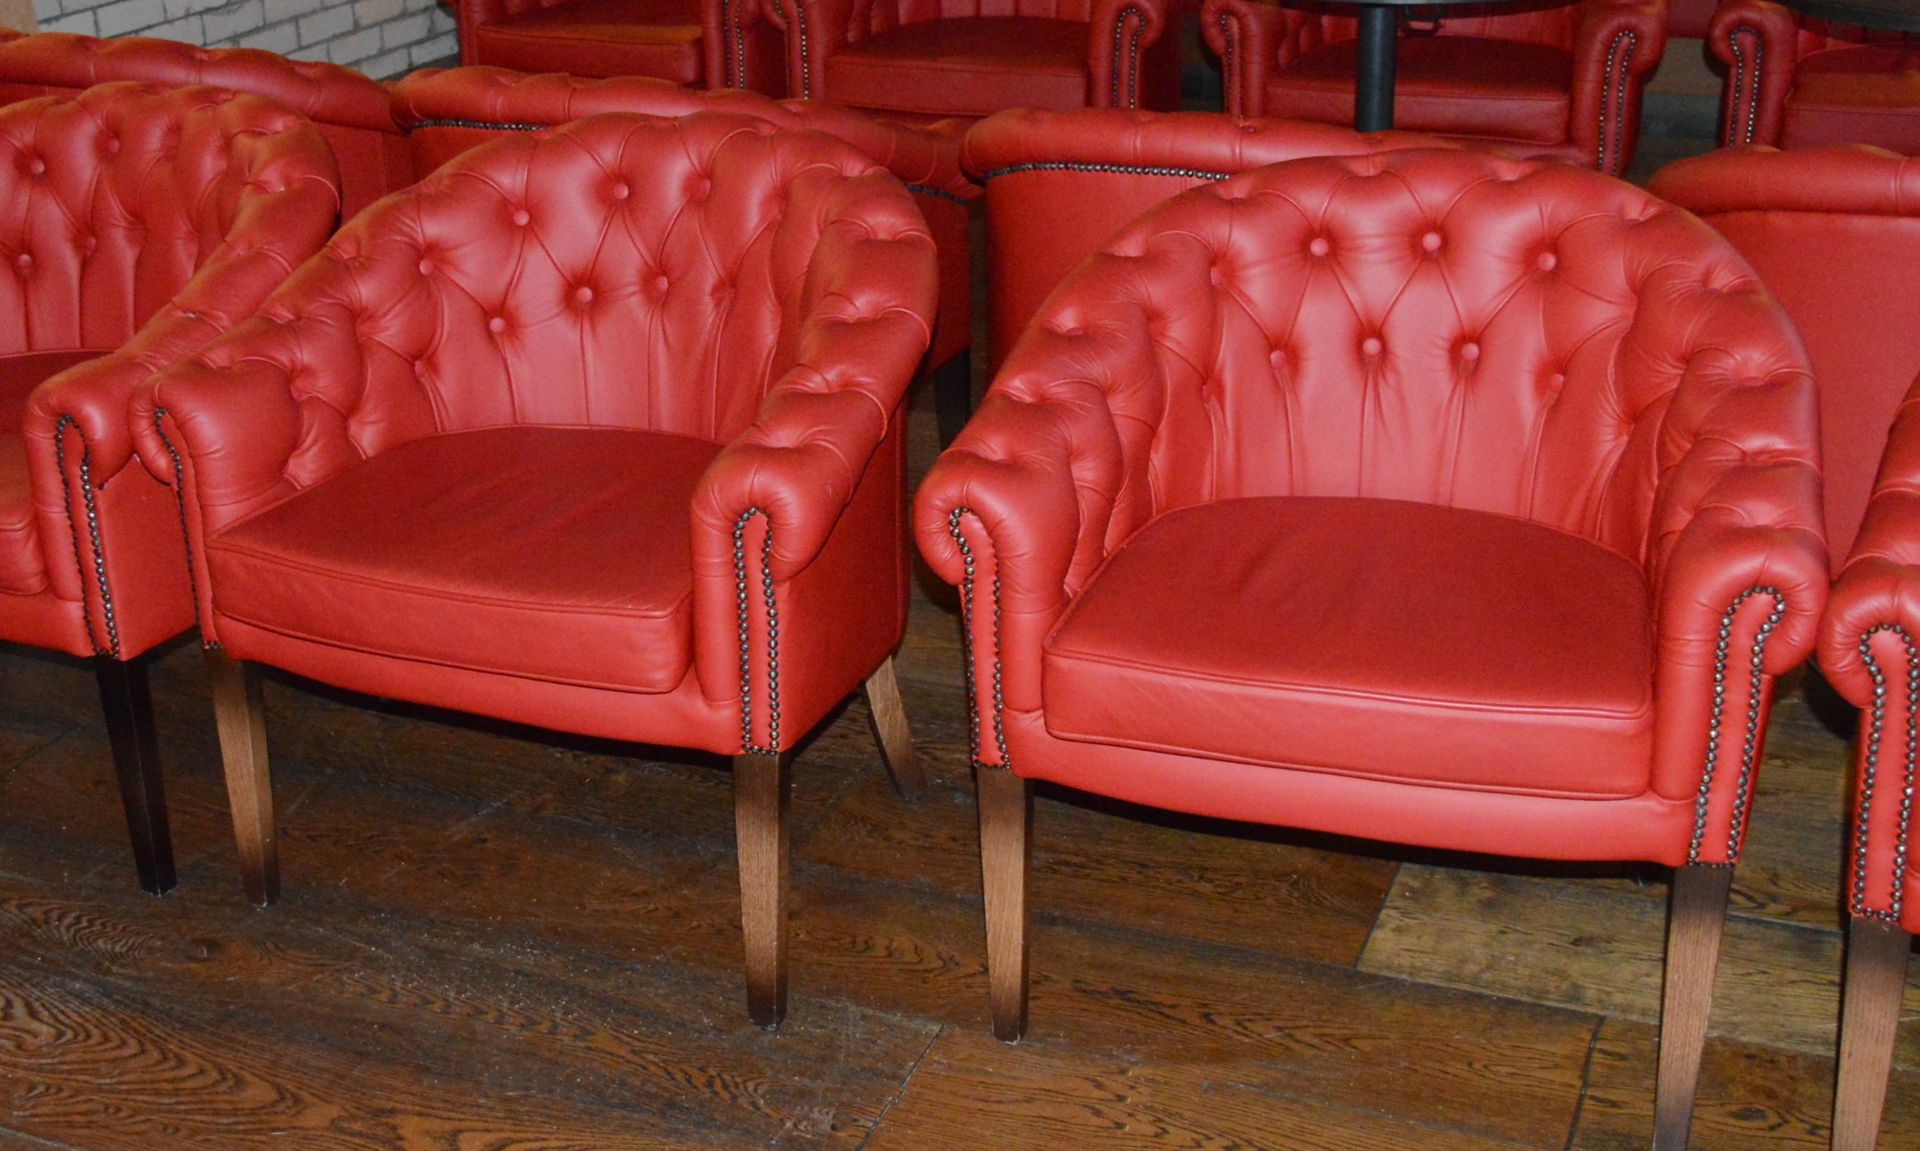 4 x Chesterfield Style Buttoned Back Red Leather Tub Chairs With Hardwood Legs Finished in an